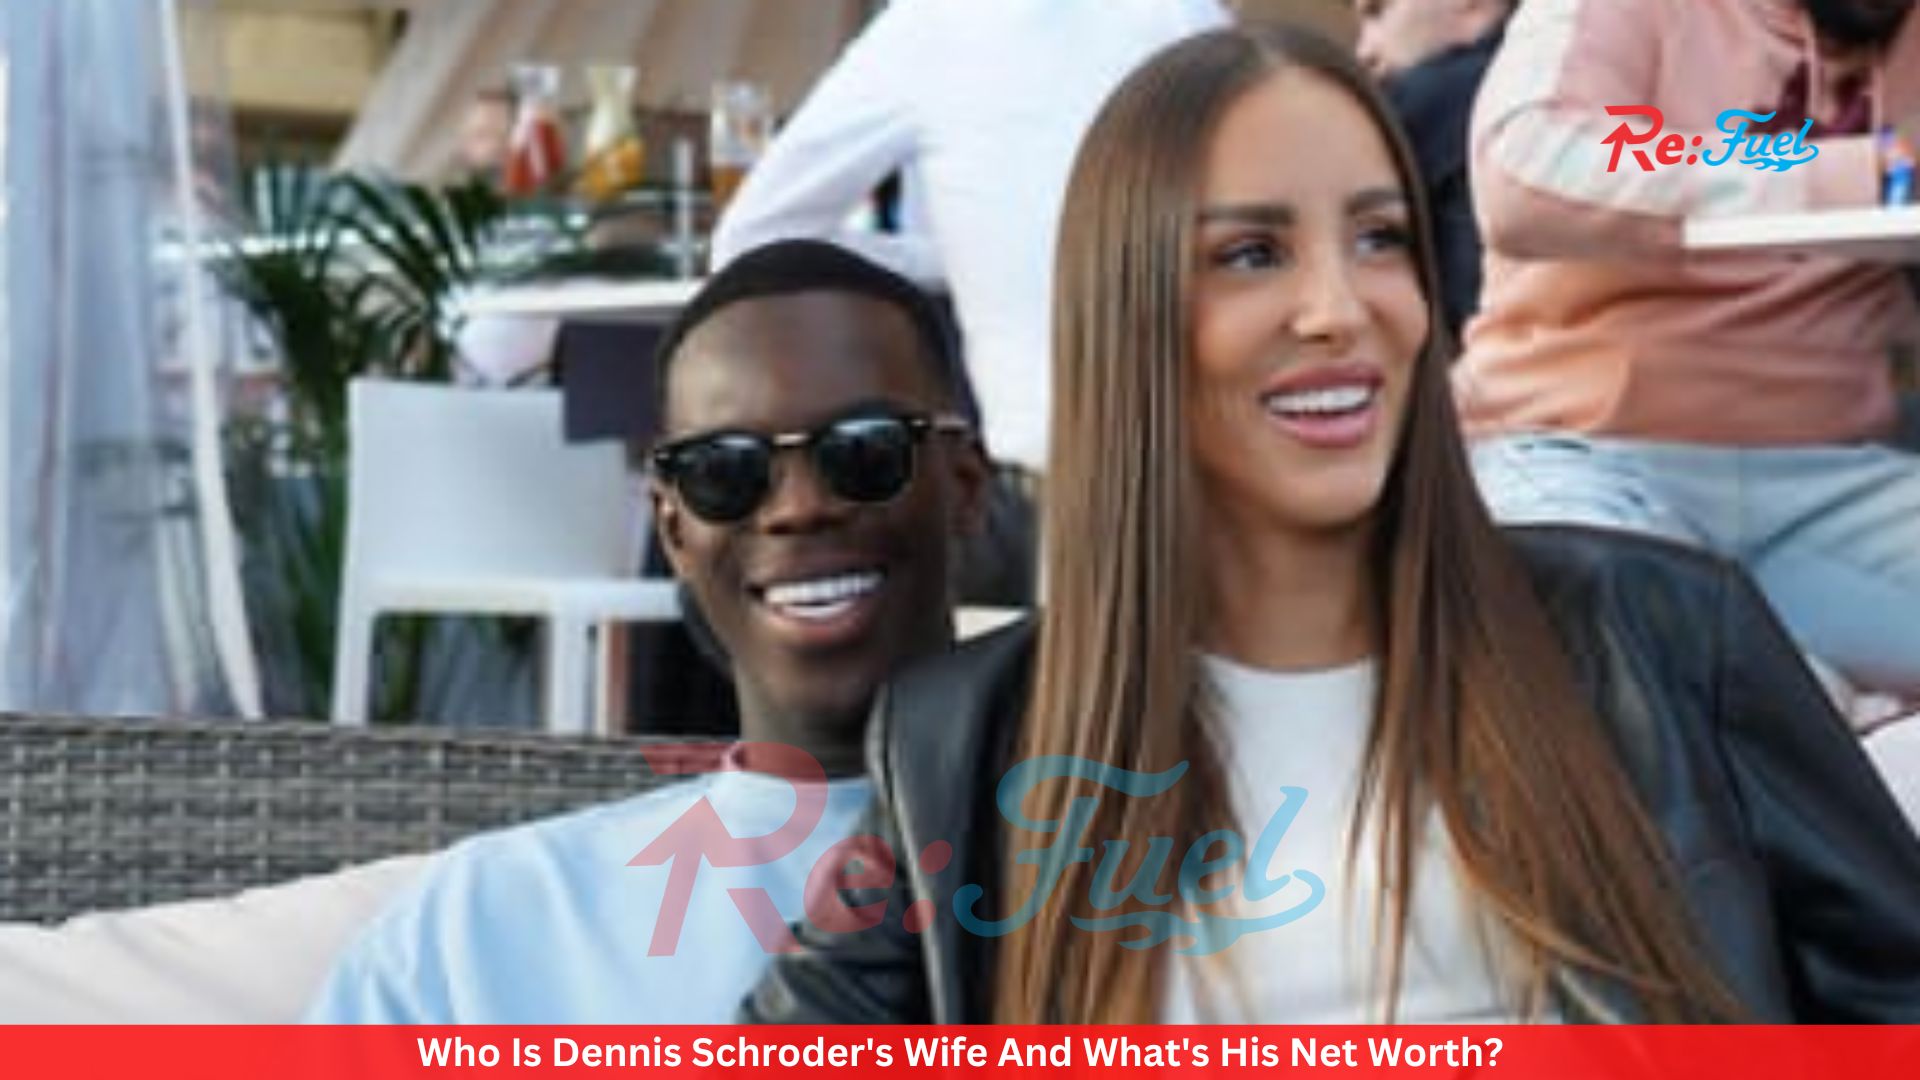 Who Is Dennis Schroder's Wife And What's His Net Worth?